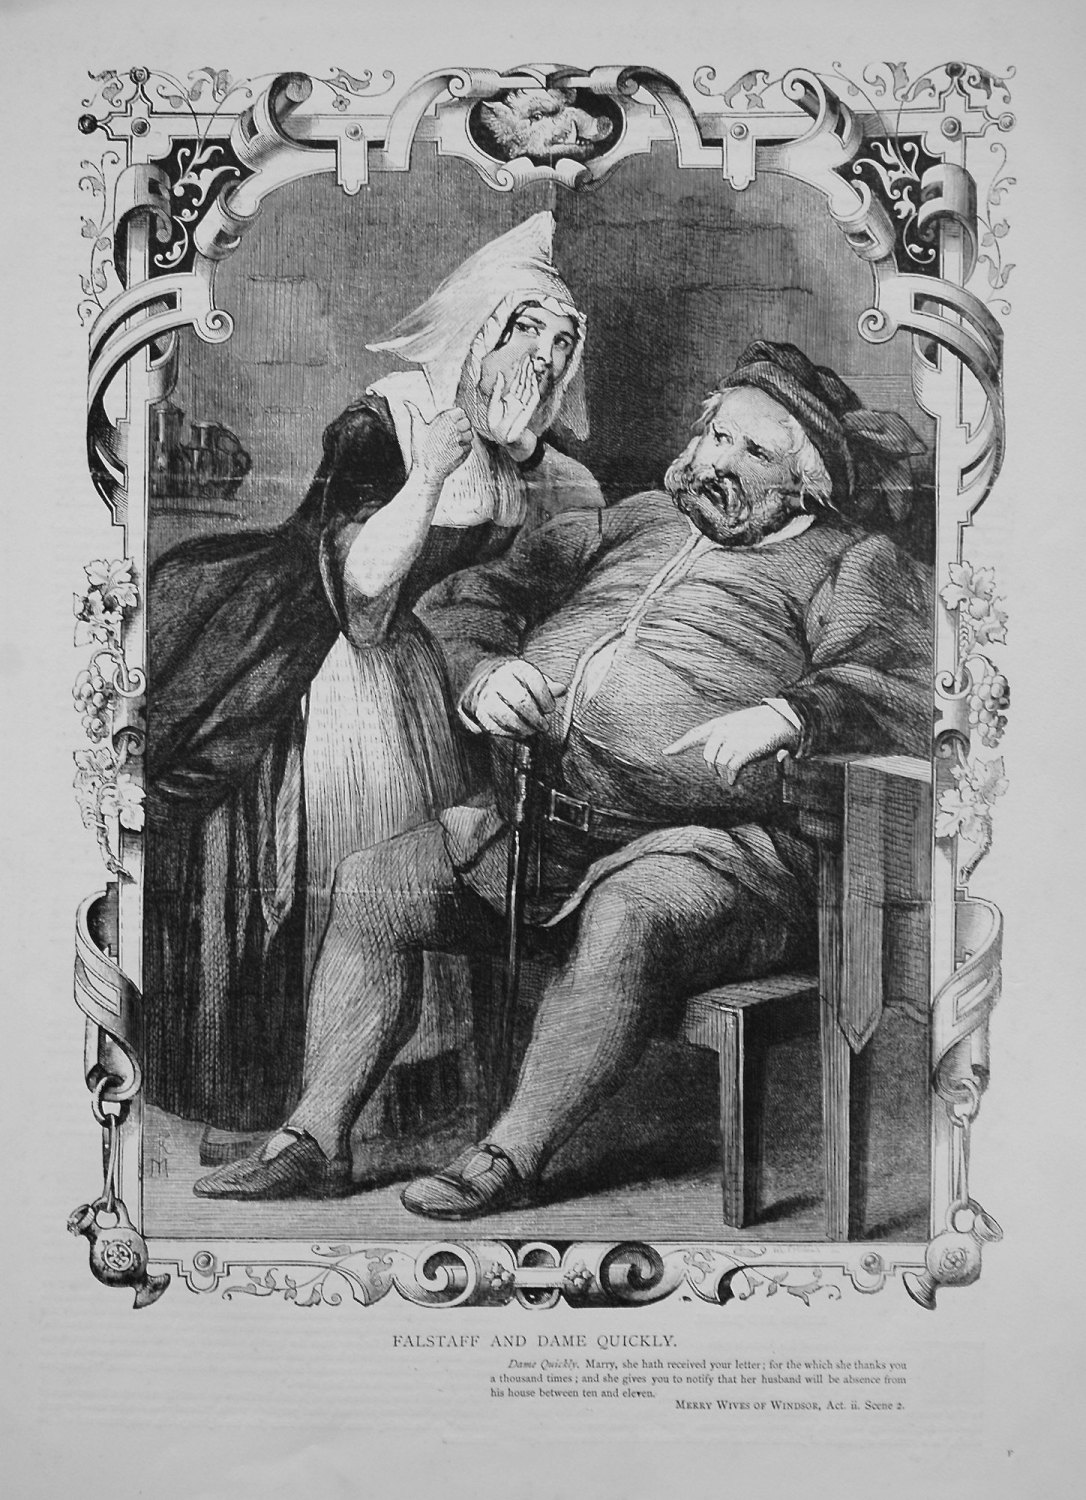 Falstaff and Dame Quickly. 1864.